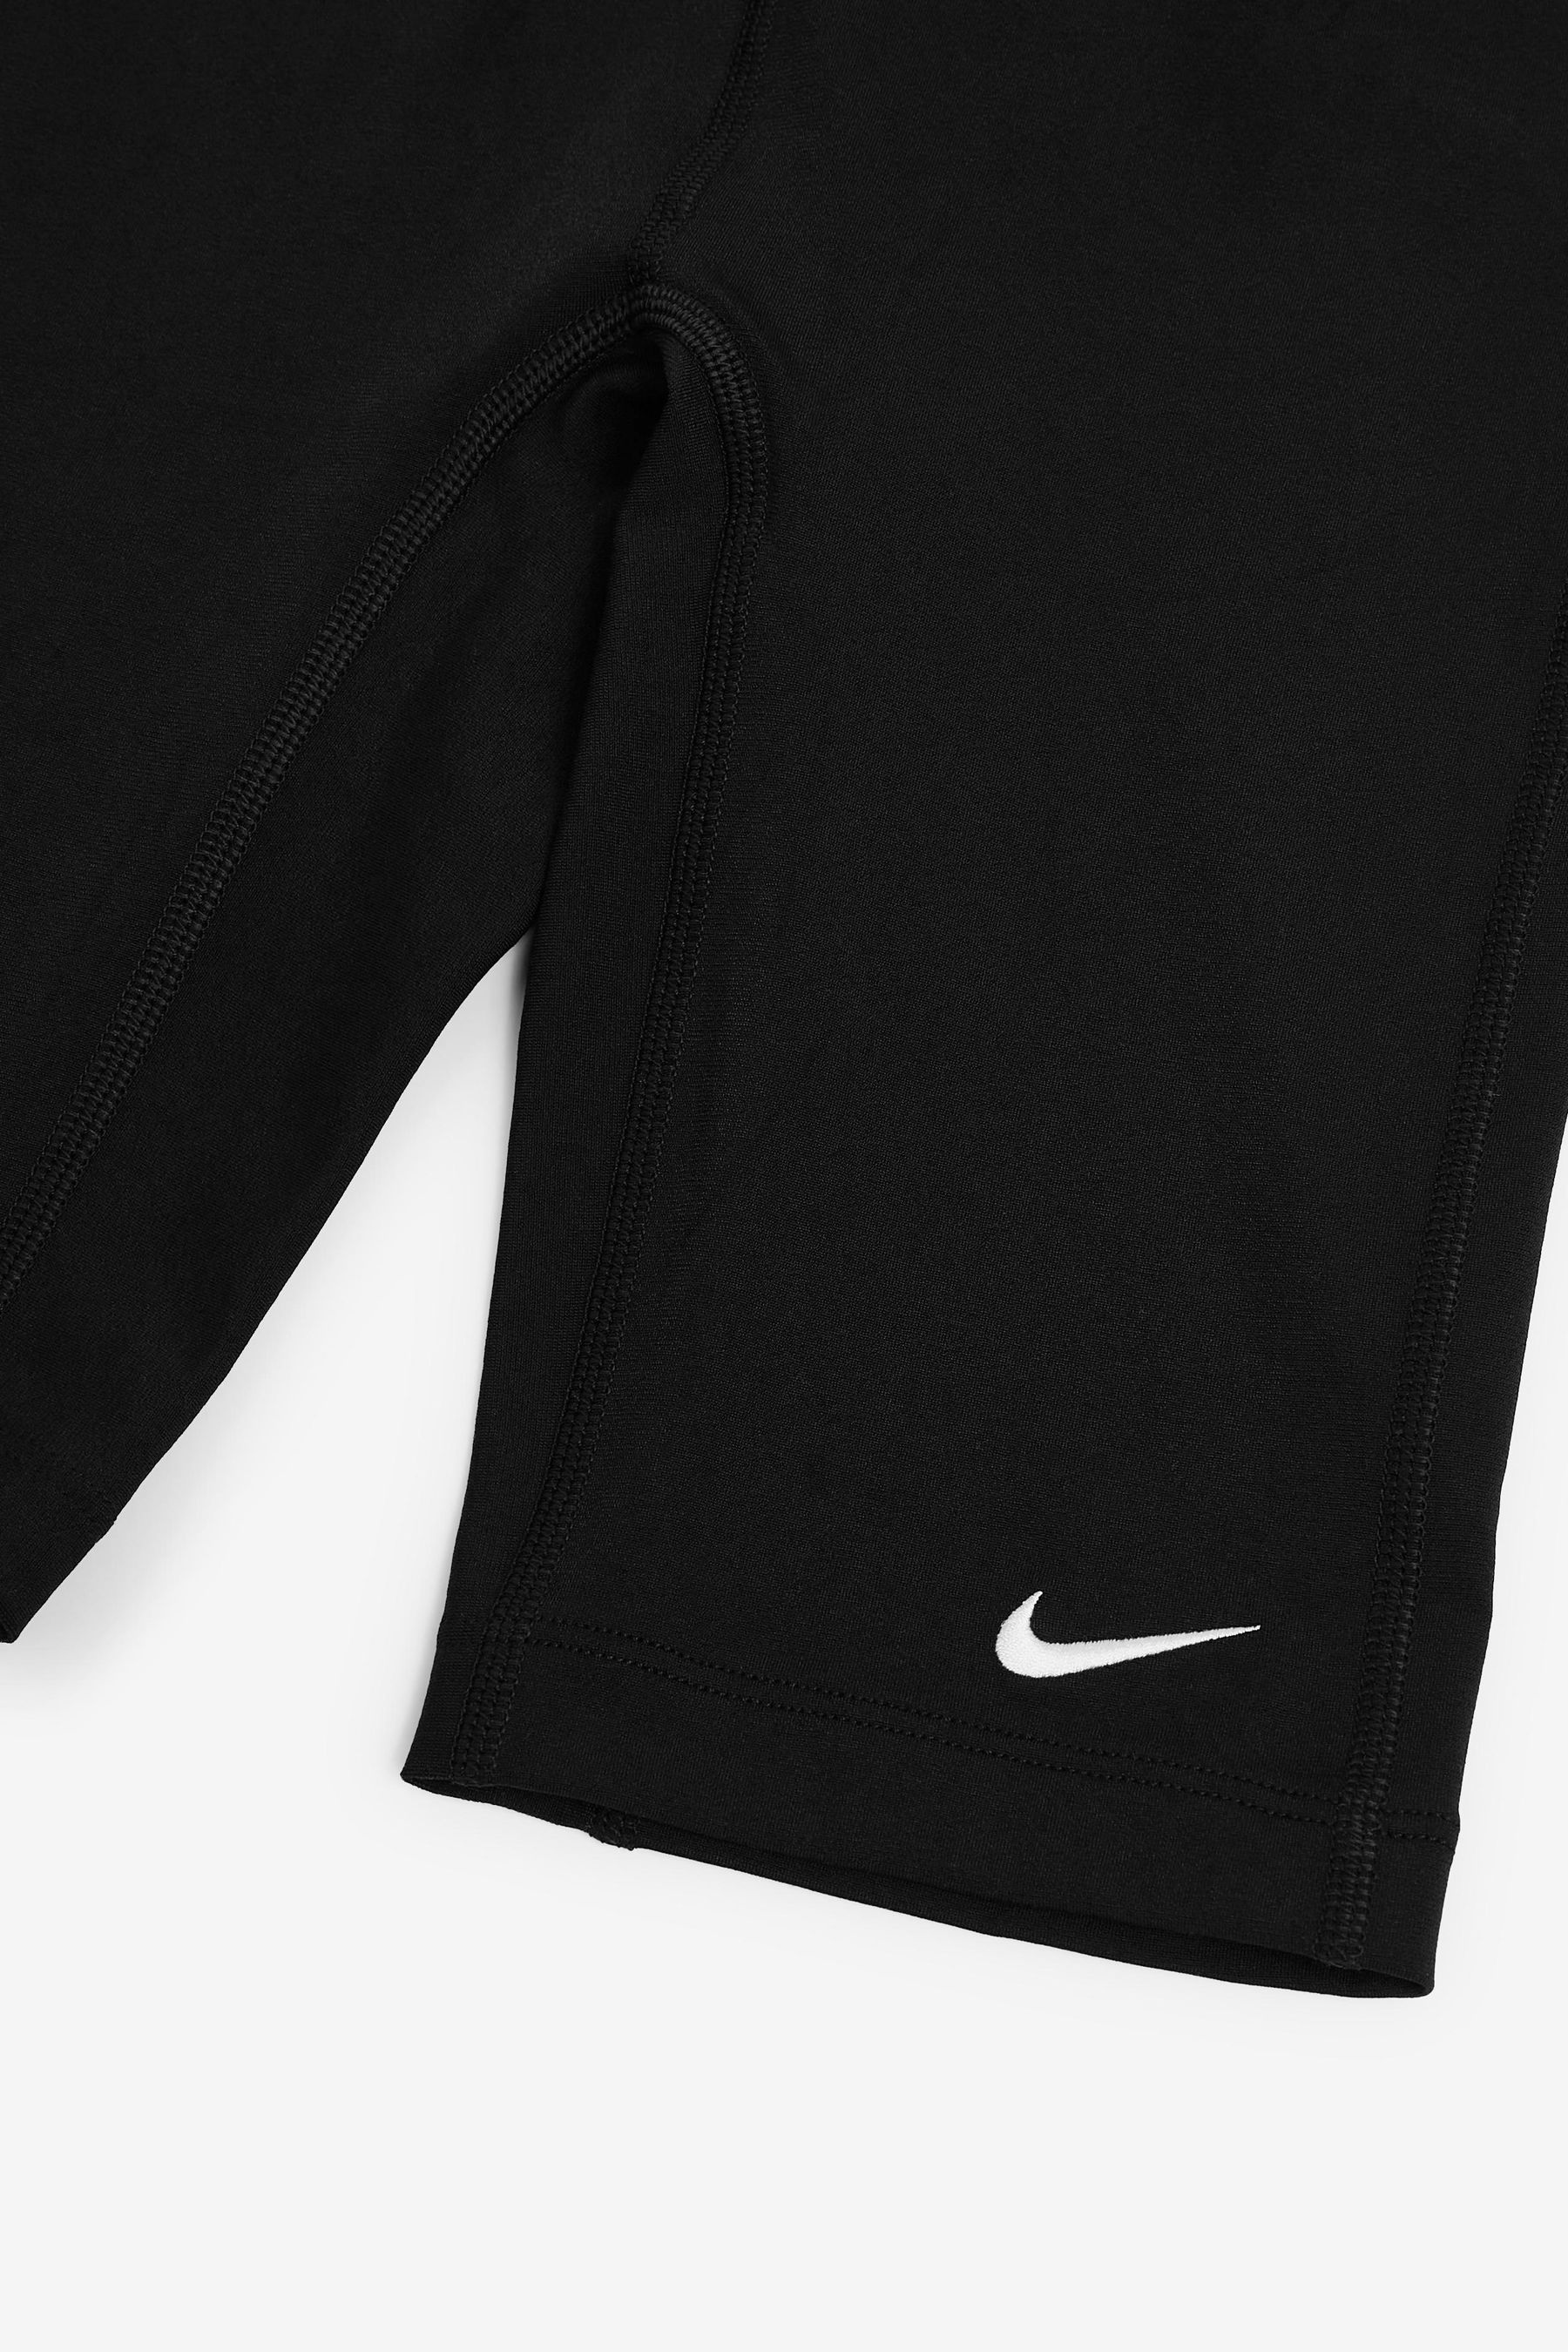 Buy Nike Black Hydrastrong Jammer Swim Shorts from the Next UK online shop